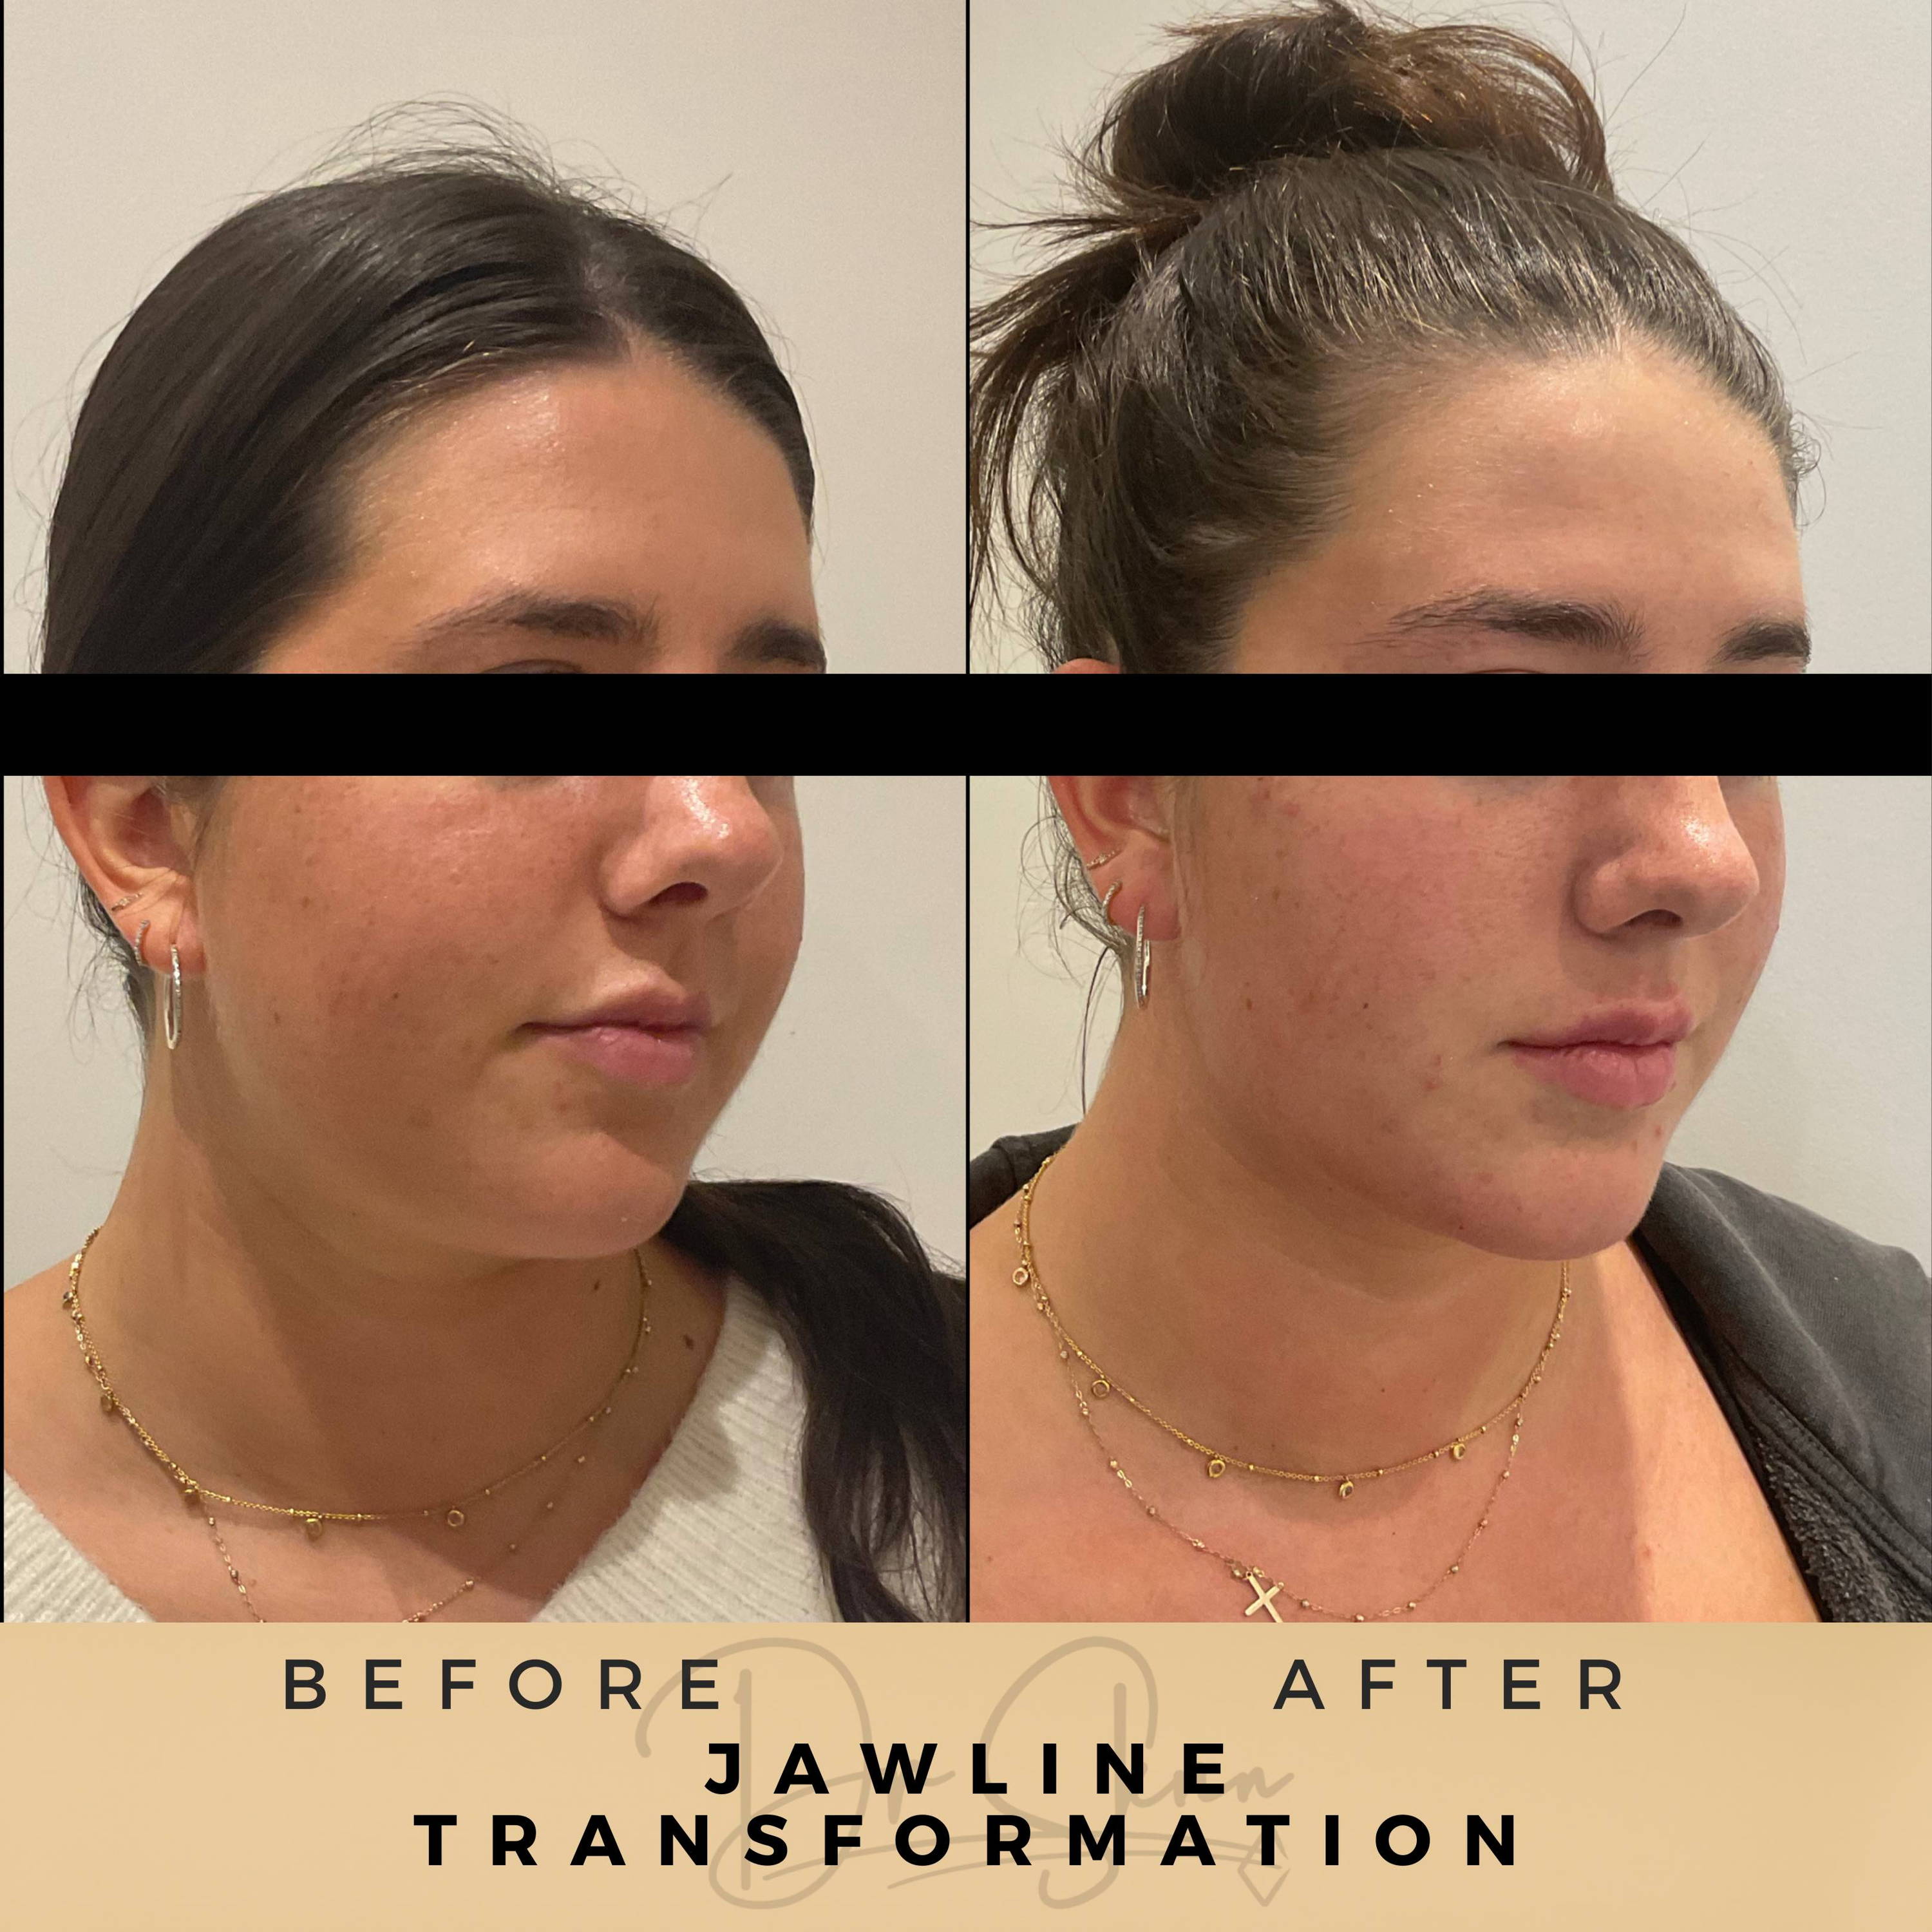 Transformations Aesthetic Clinic Wilmslow Before & After Dr Sknn